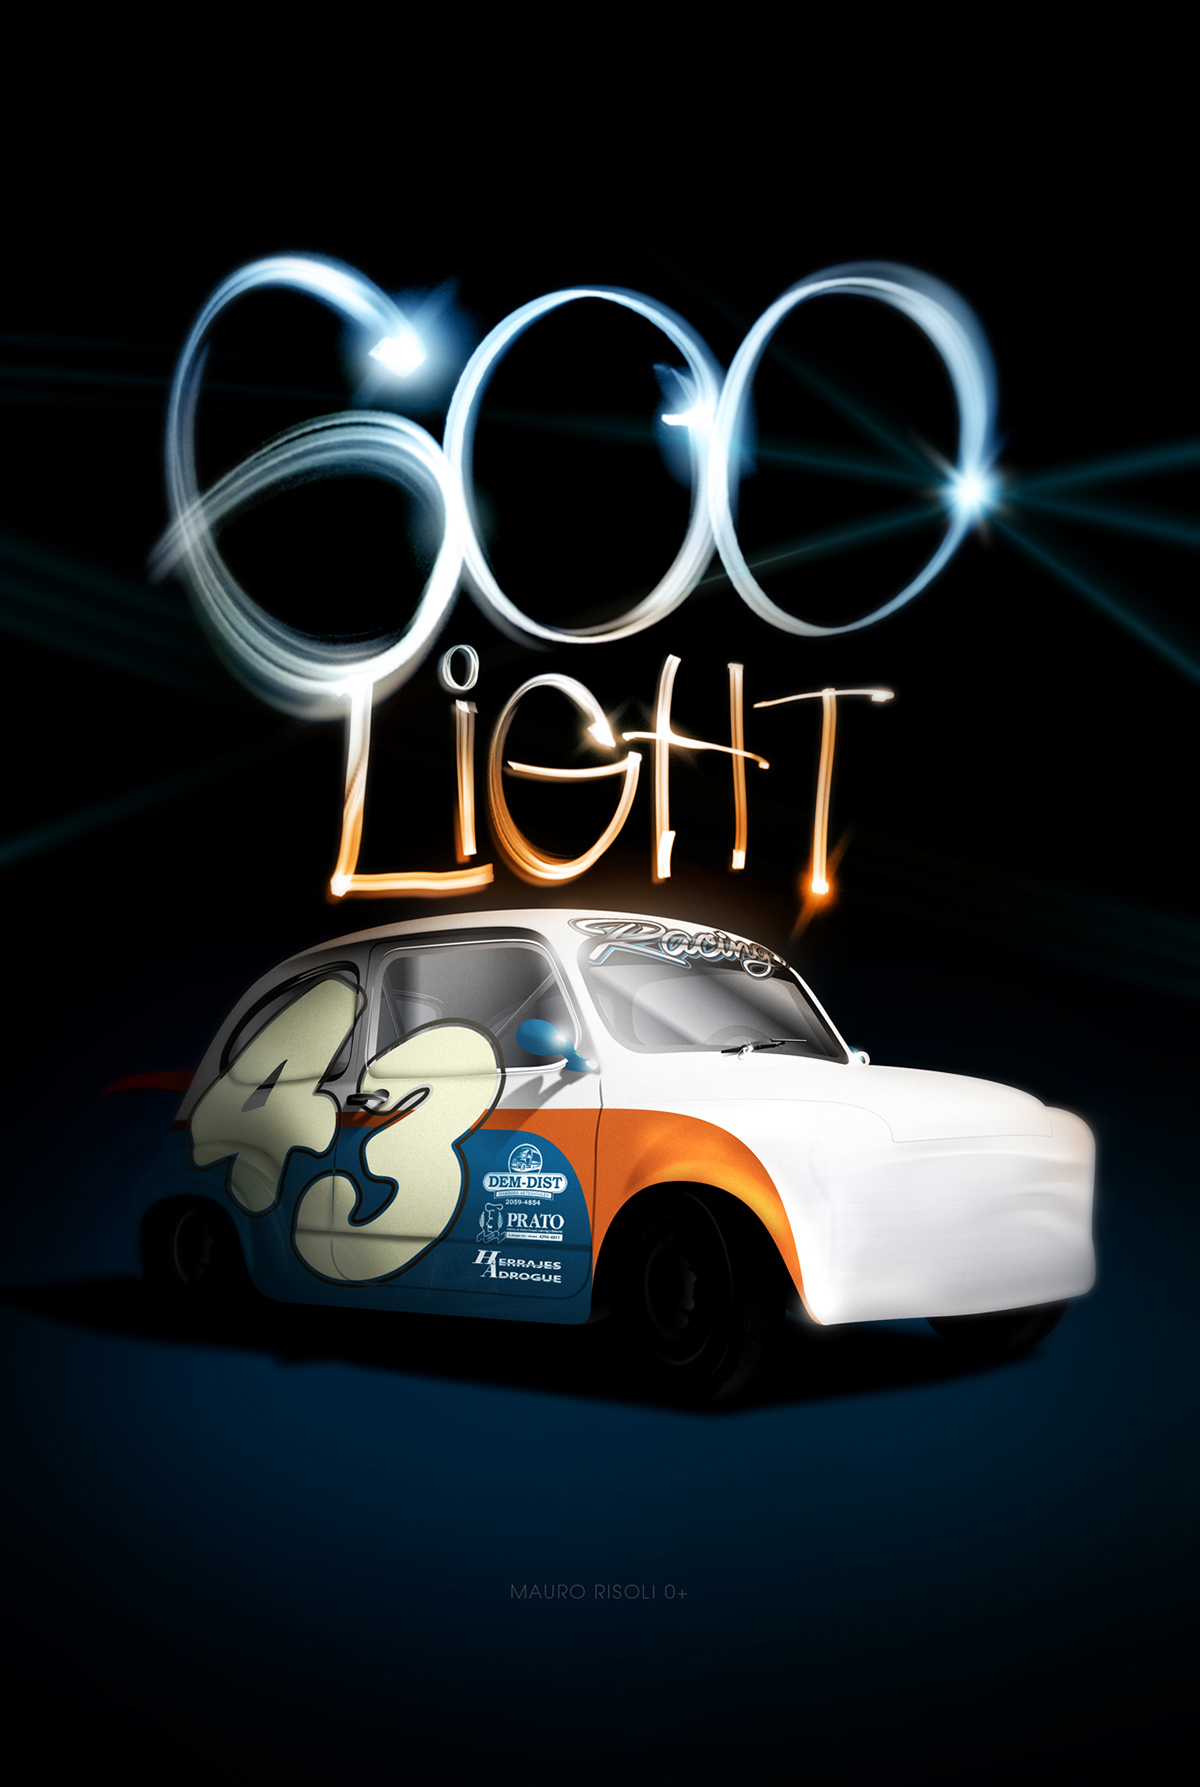 light 600 light Racing car Racing Car tag light light painting race speed Cars fiat fiat 600